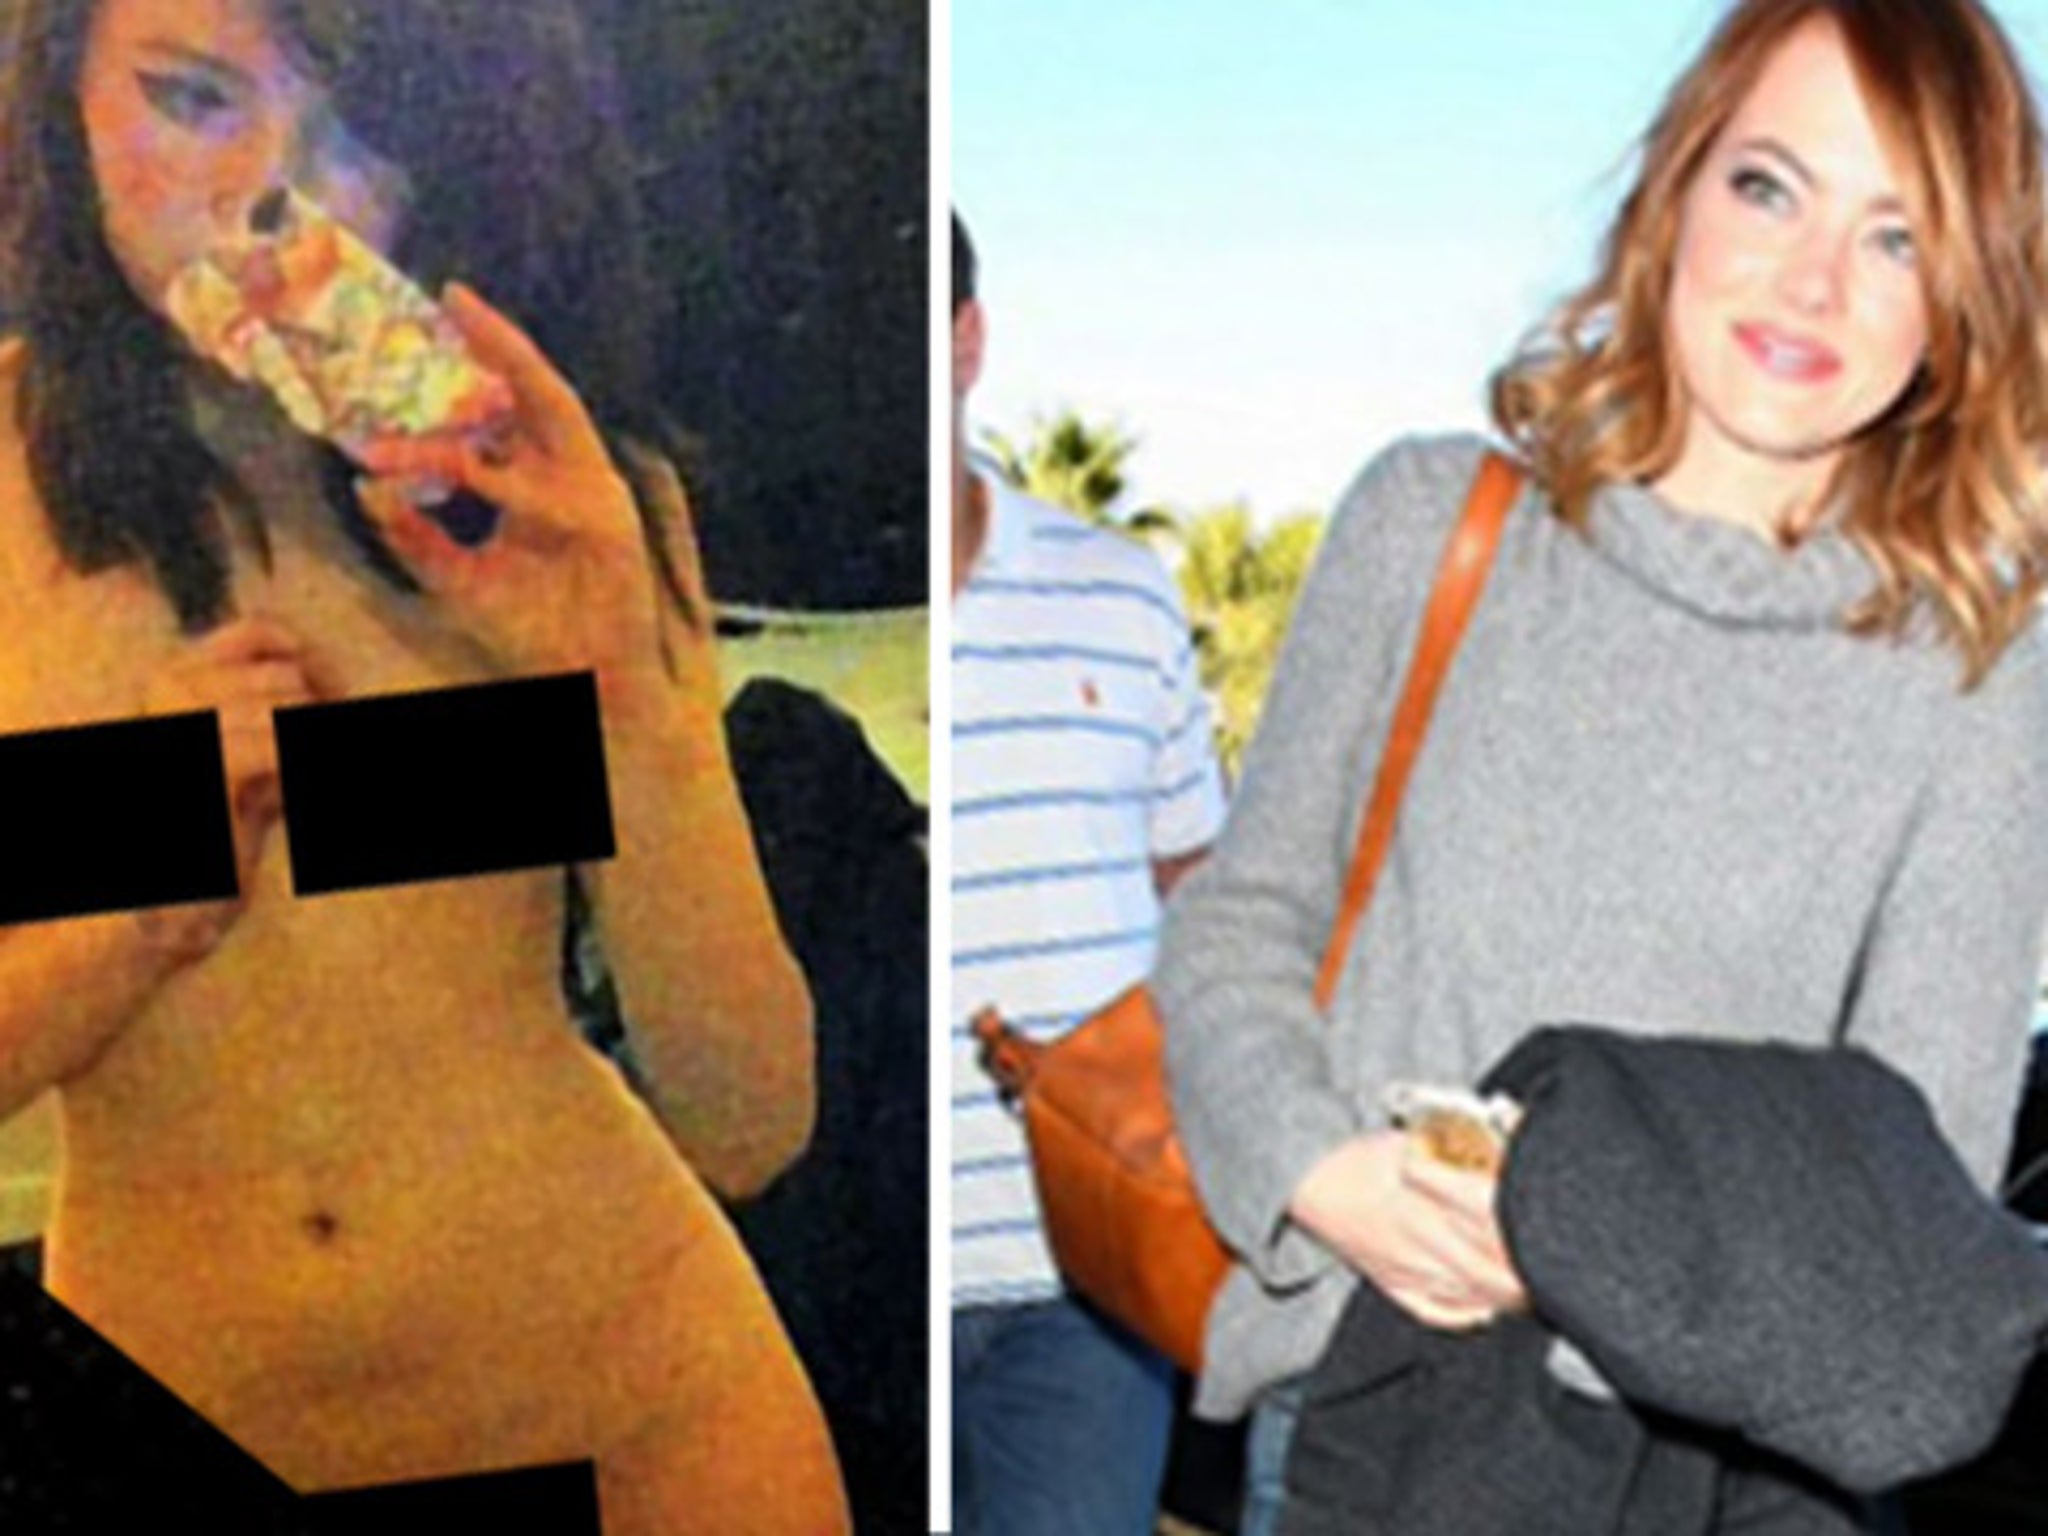 bud watson recommends emma stone nude selfies pic